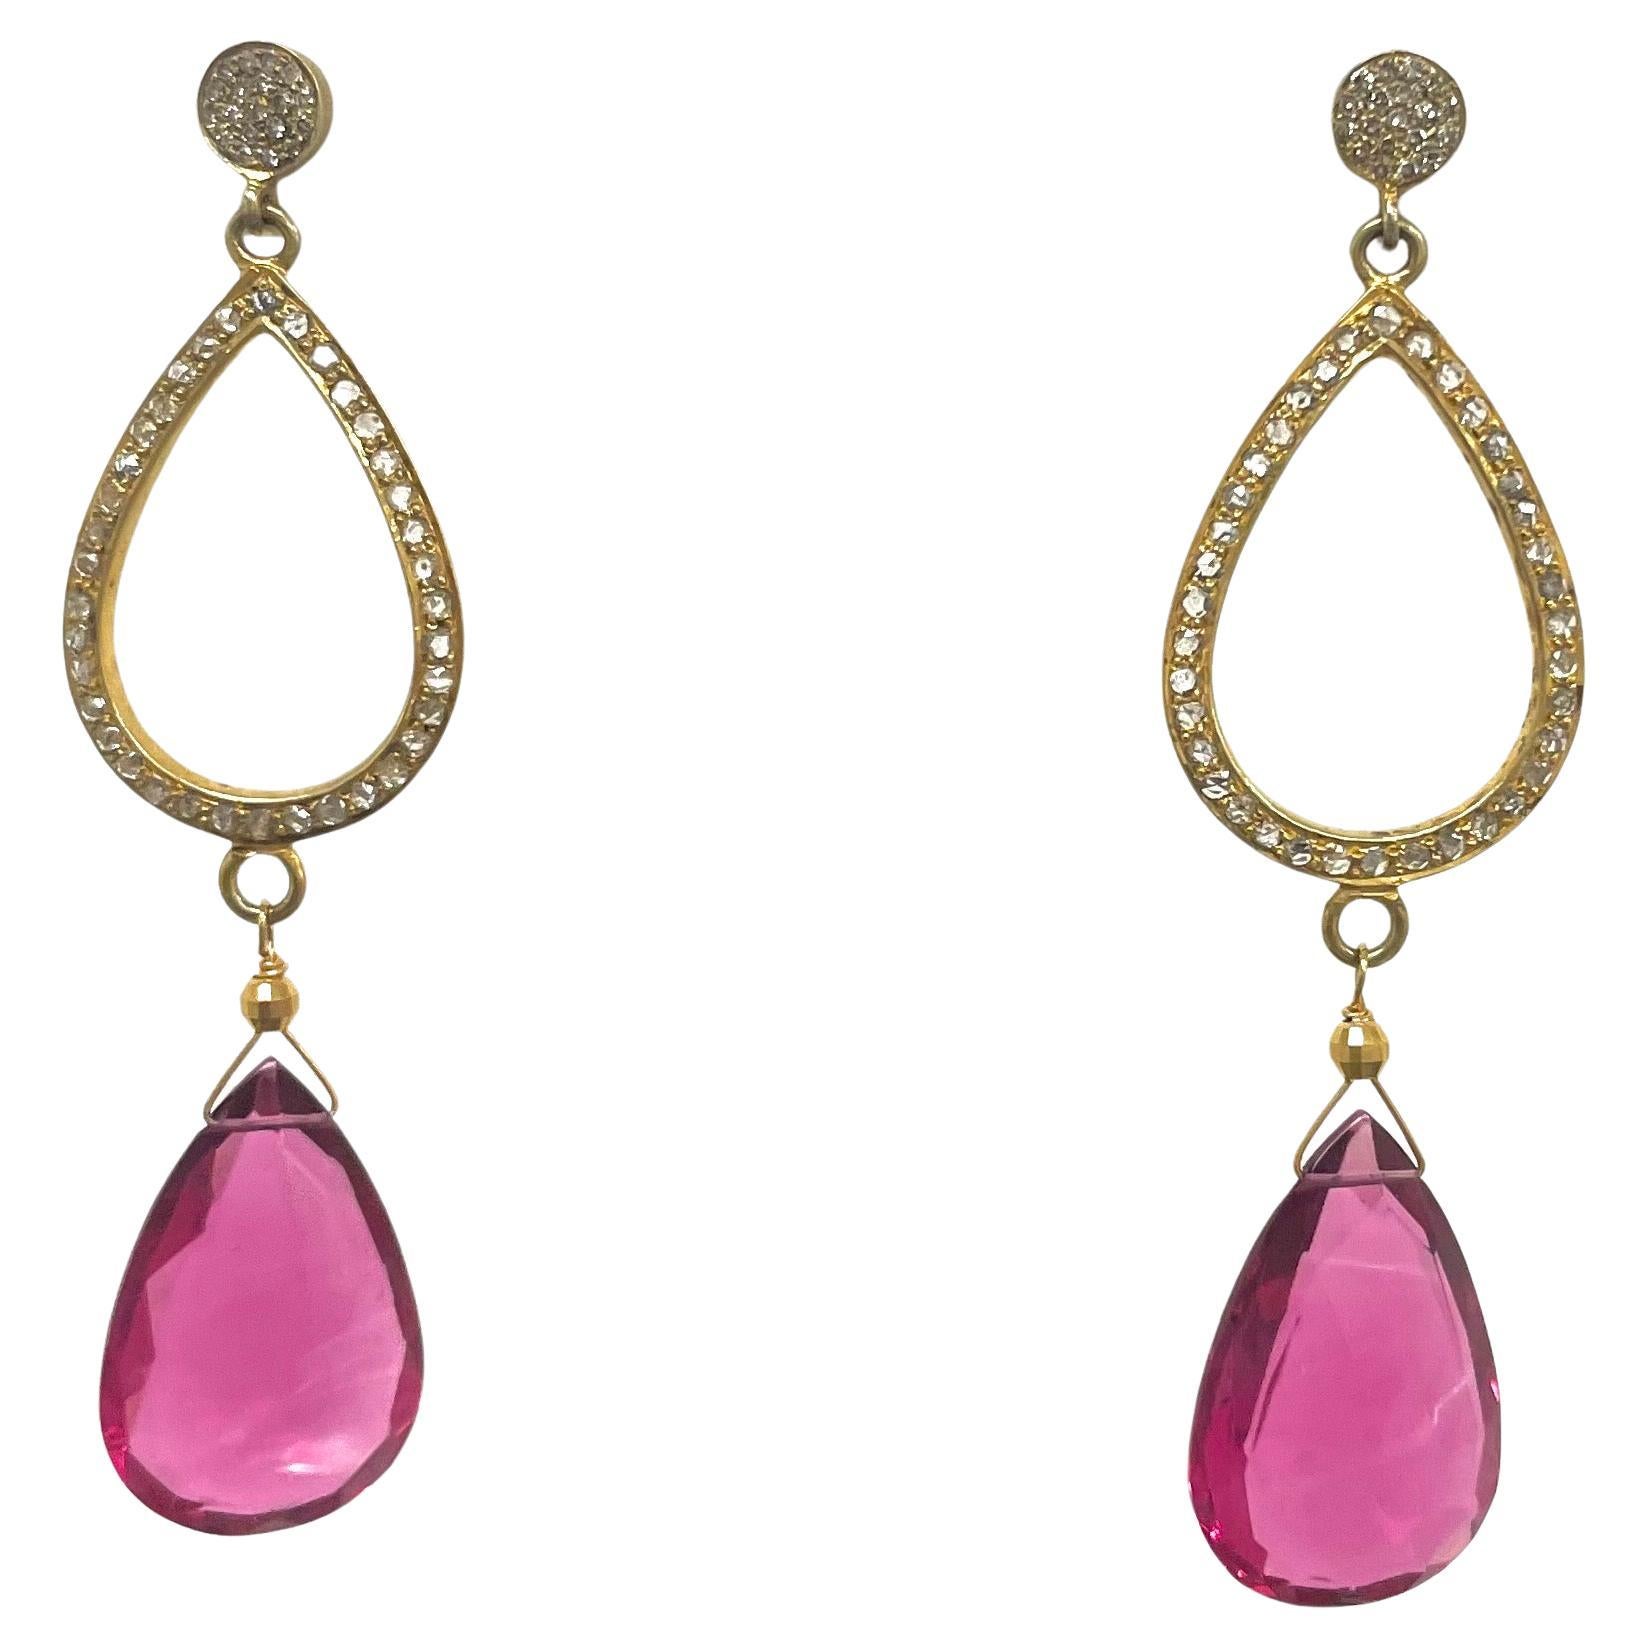  Hot Pink Pear Shape Drop Paradizia Earrings with Diamonds For Sale